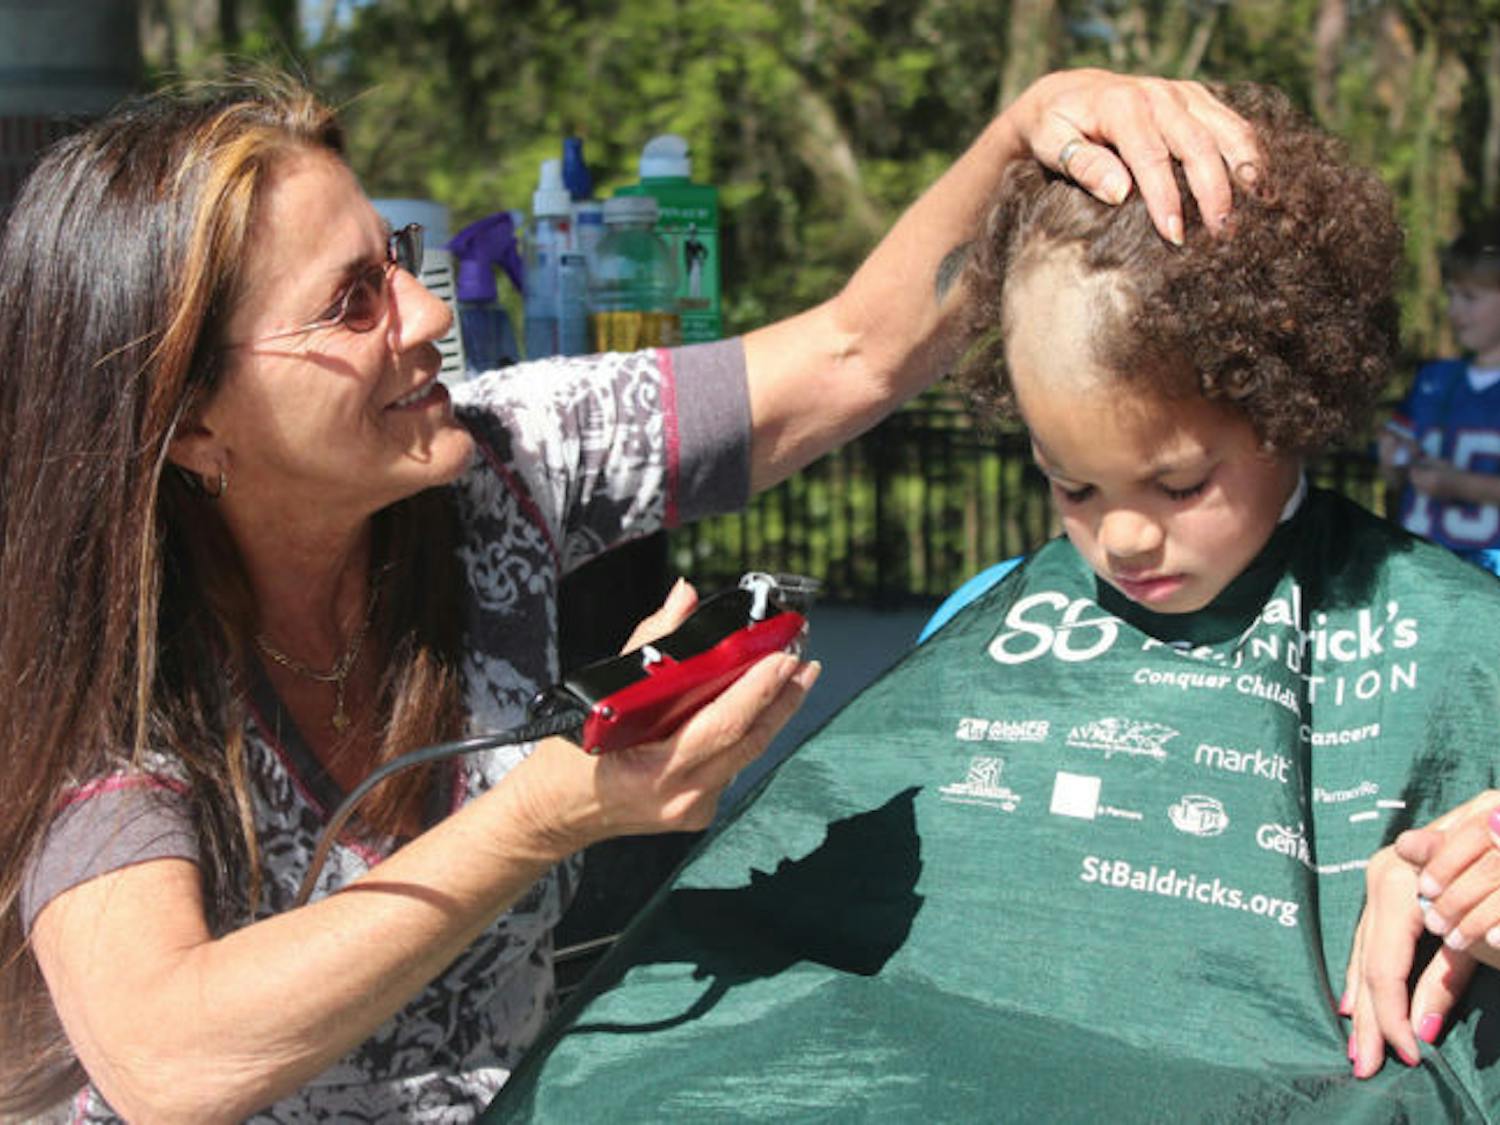 Marguerite Gaisser shaves Dwayne Lewis’ head Friday afternoon on Flavet Field as part of the Freshman Leadership Council’s annual St. Baldrick’s event benefiting cancer research. The 7-year-old, who is blind due to retinoblastoma, got his head shaved to celebrate being cancer-free for five years.